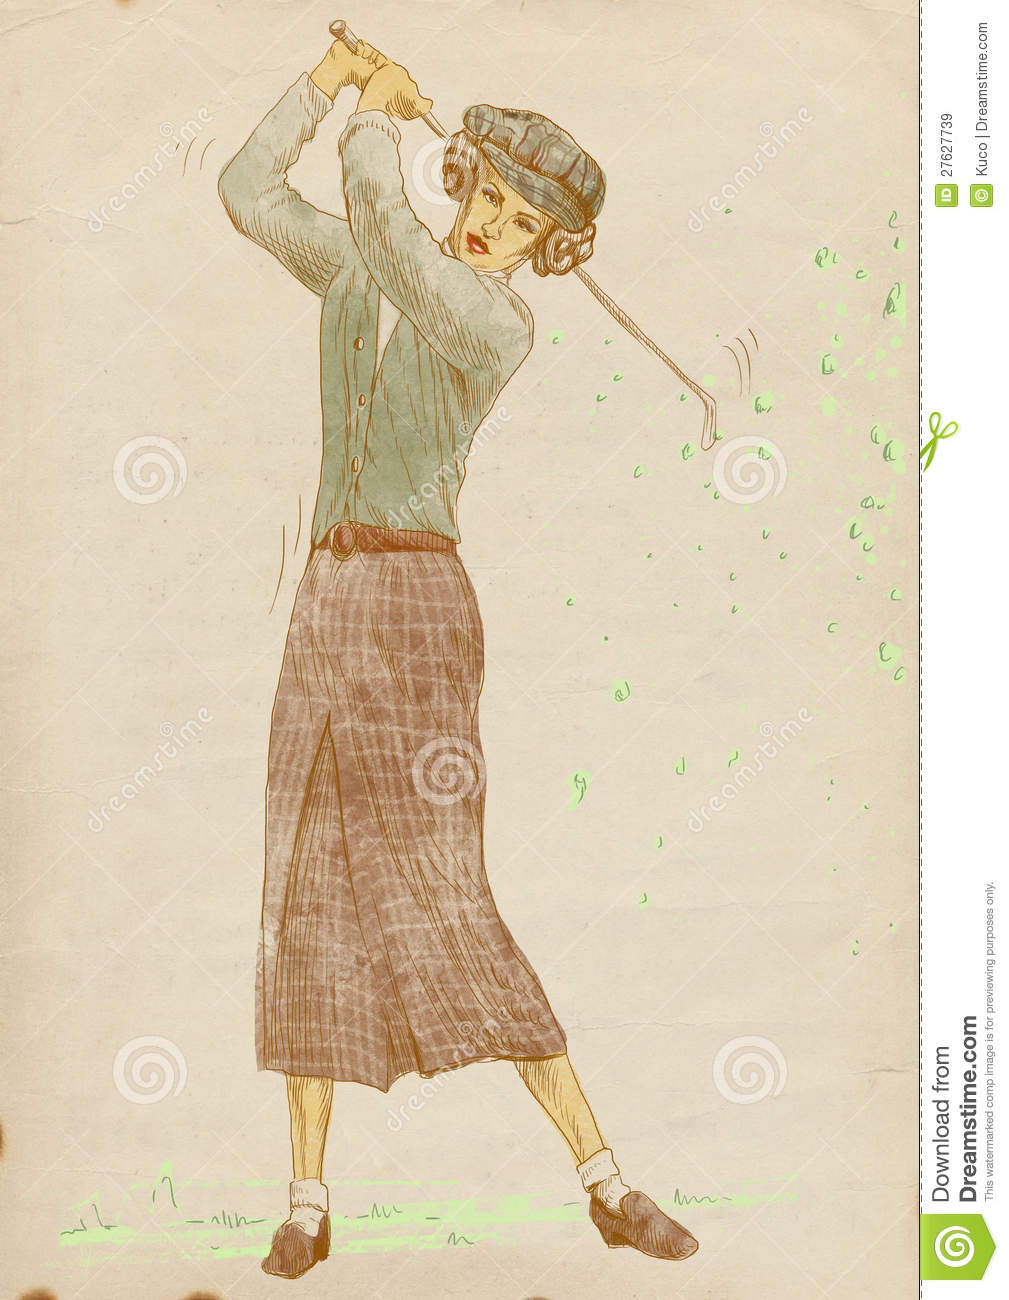 Golfer   Full Sized  Original  Hand Drawing  Useful For Live Trace    